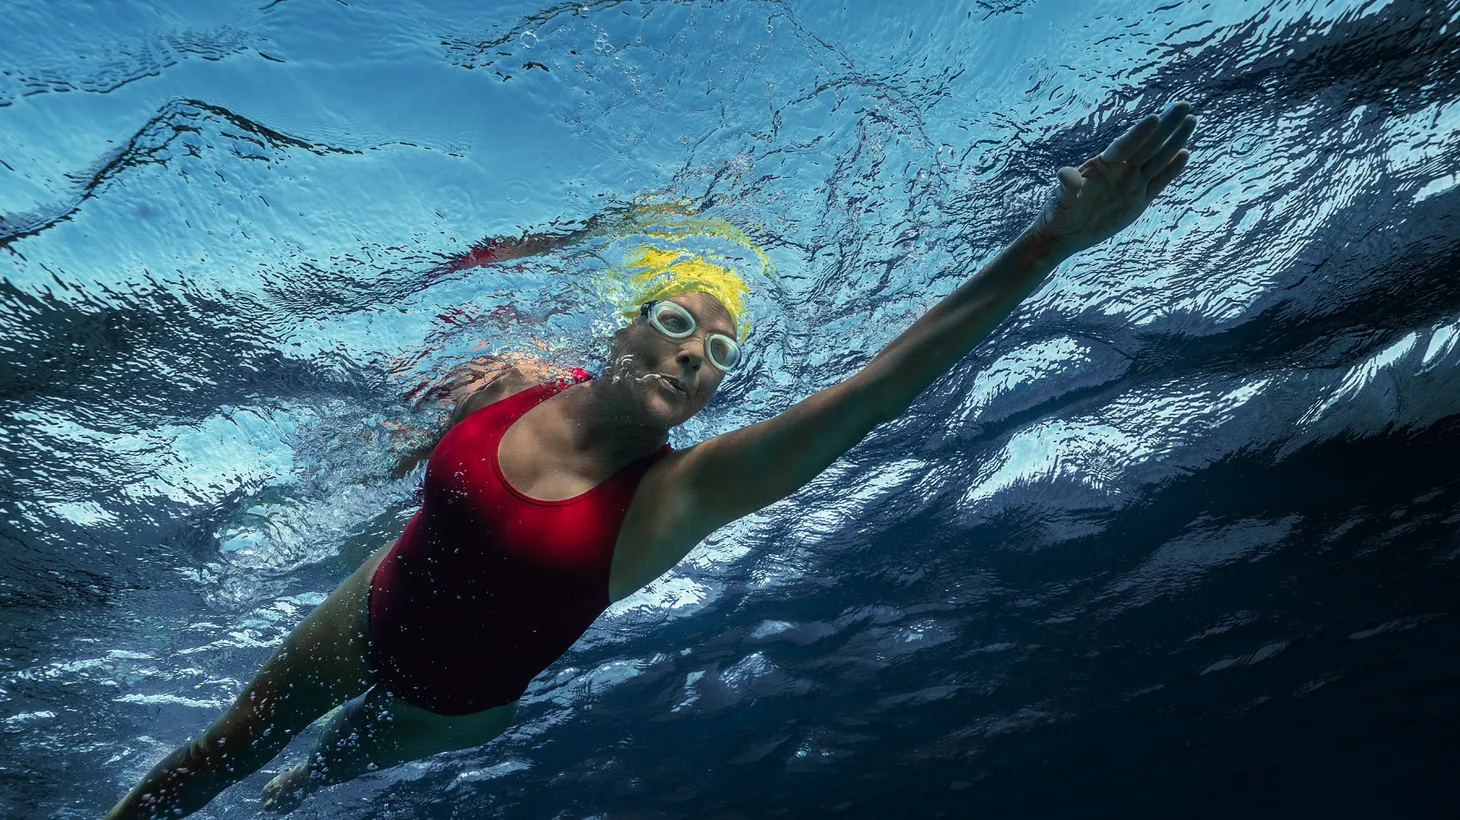 “What she did — it absolutely defies what anyone expects from a woman in her 60s, but she was just not done and didn’t want to just fade away,” says Nyad director Elizabeth Chai Vasarhelyi about swimmer Diana Nyad.